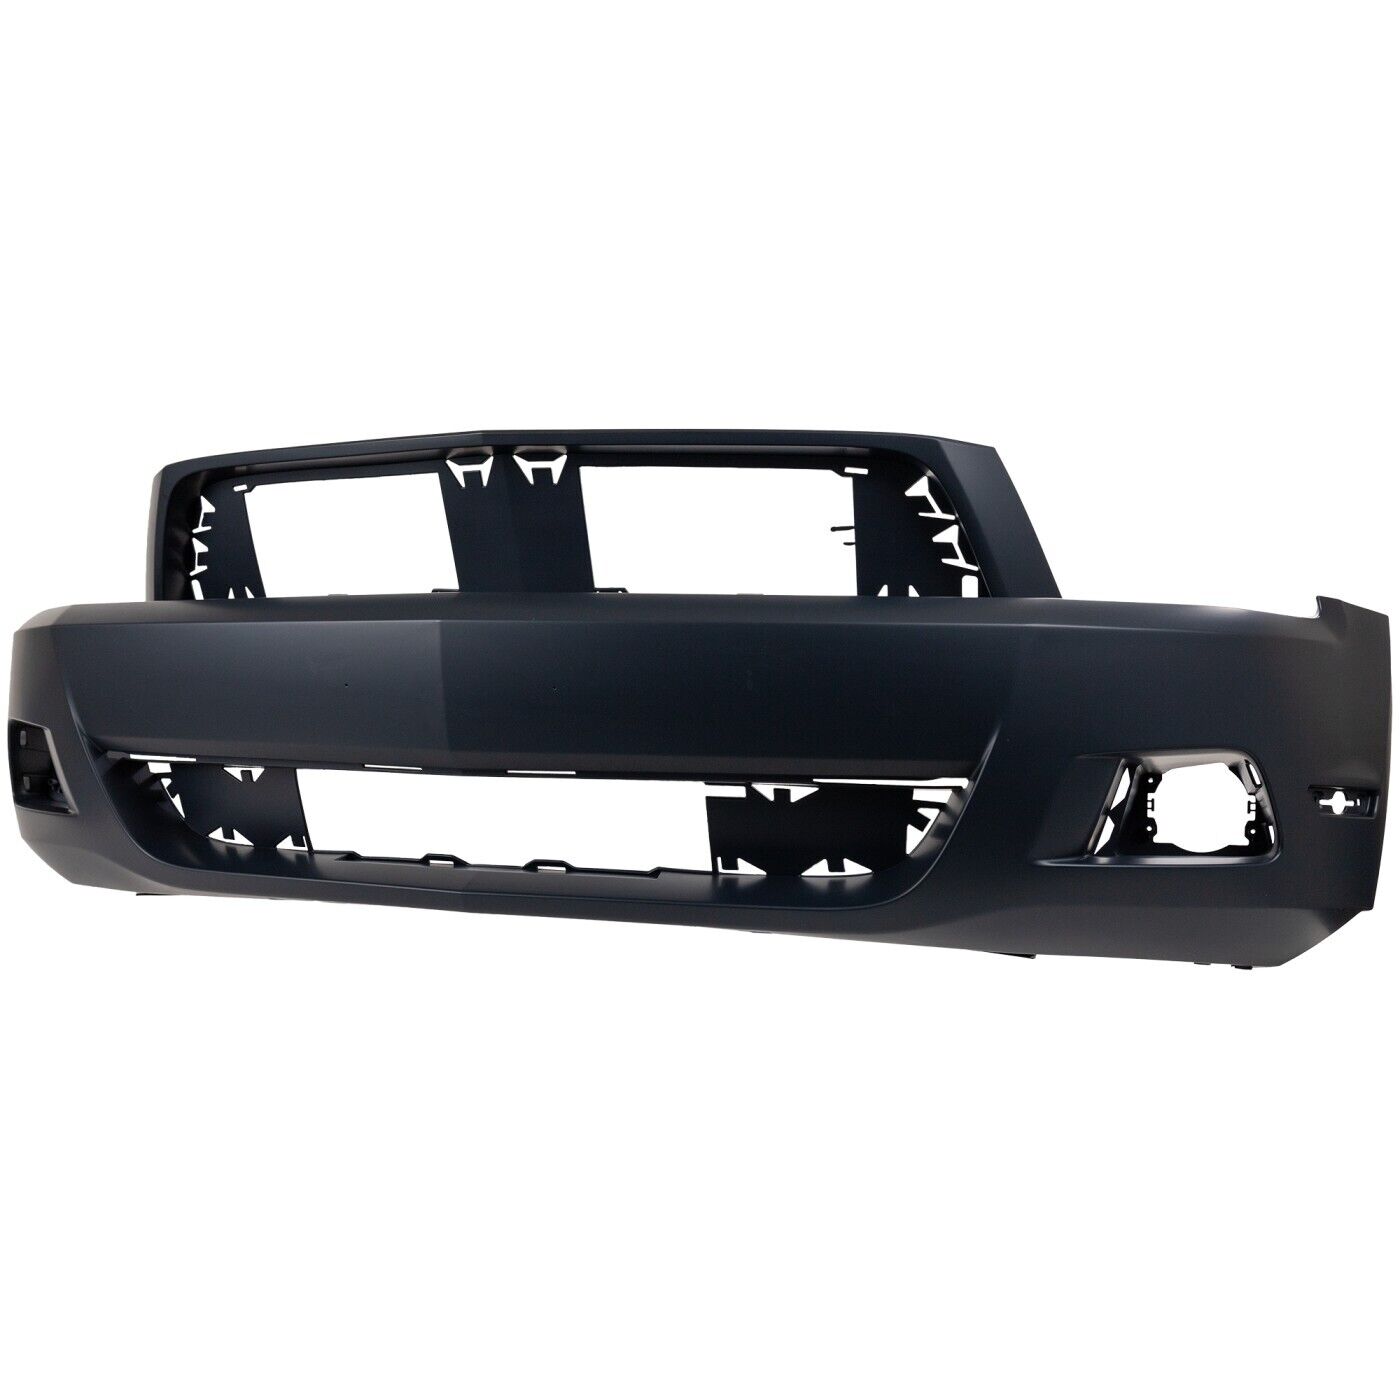 Front Bumper Cover For 2010-2012 Ford Mustang w/ fog lamp holes Primed CAPA